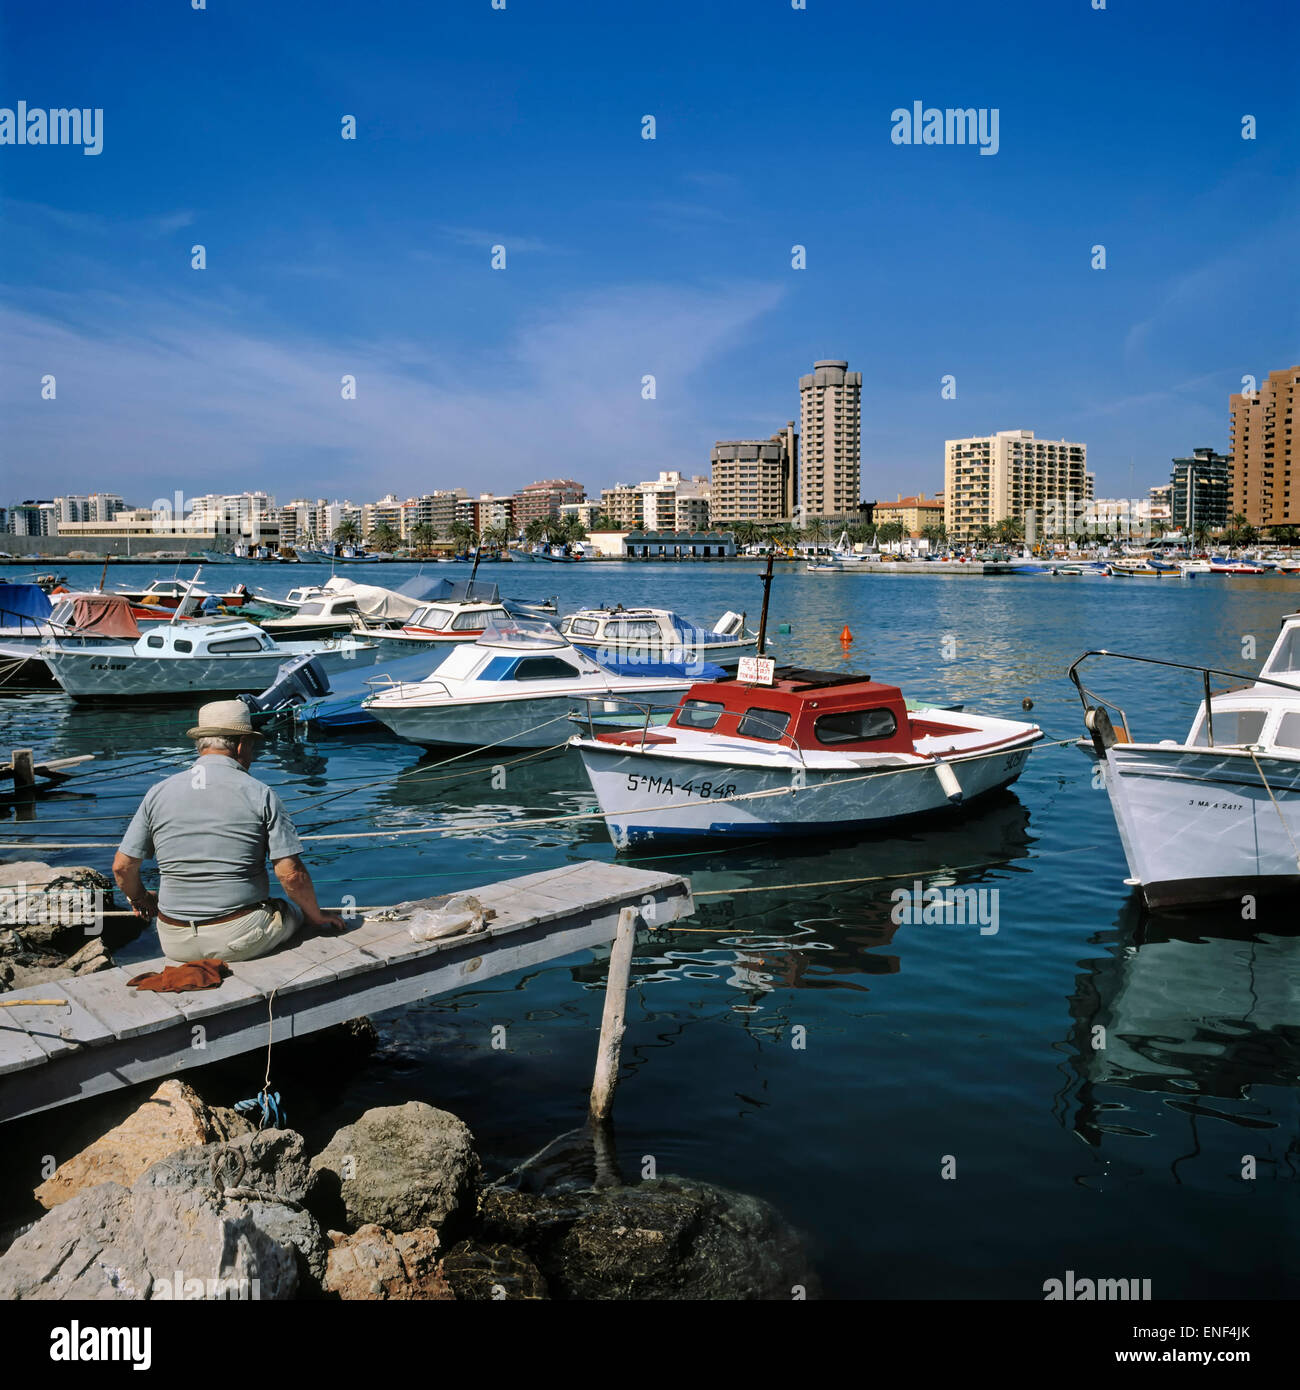 Fuengirola, Costa del Sol, Malaga Province, Andalusia, southern Spain.  View across fishing harbour to town. Stock Photo